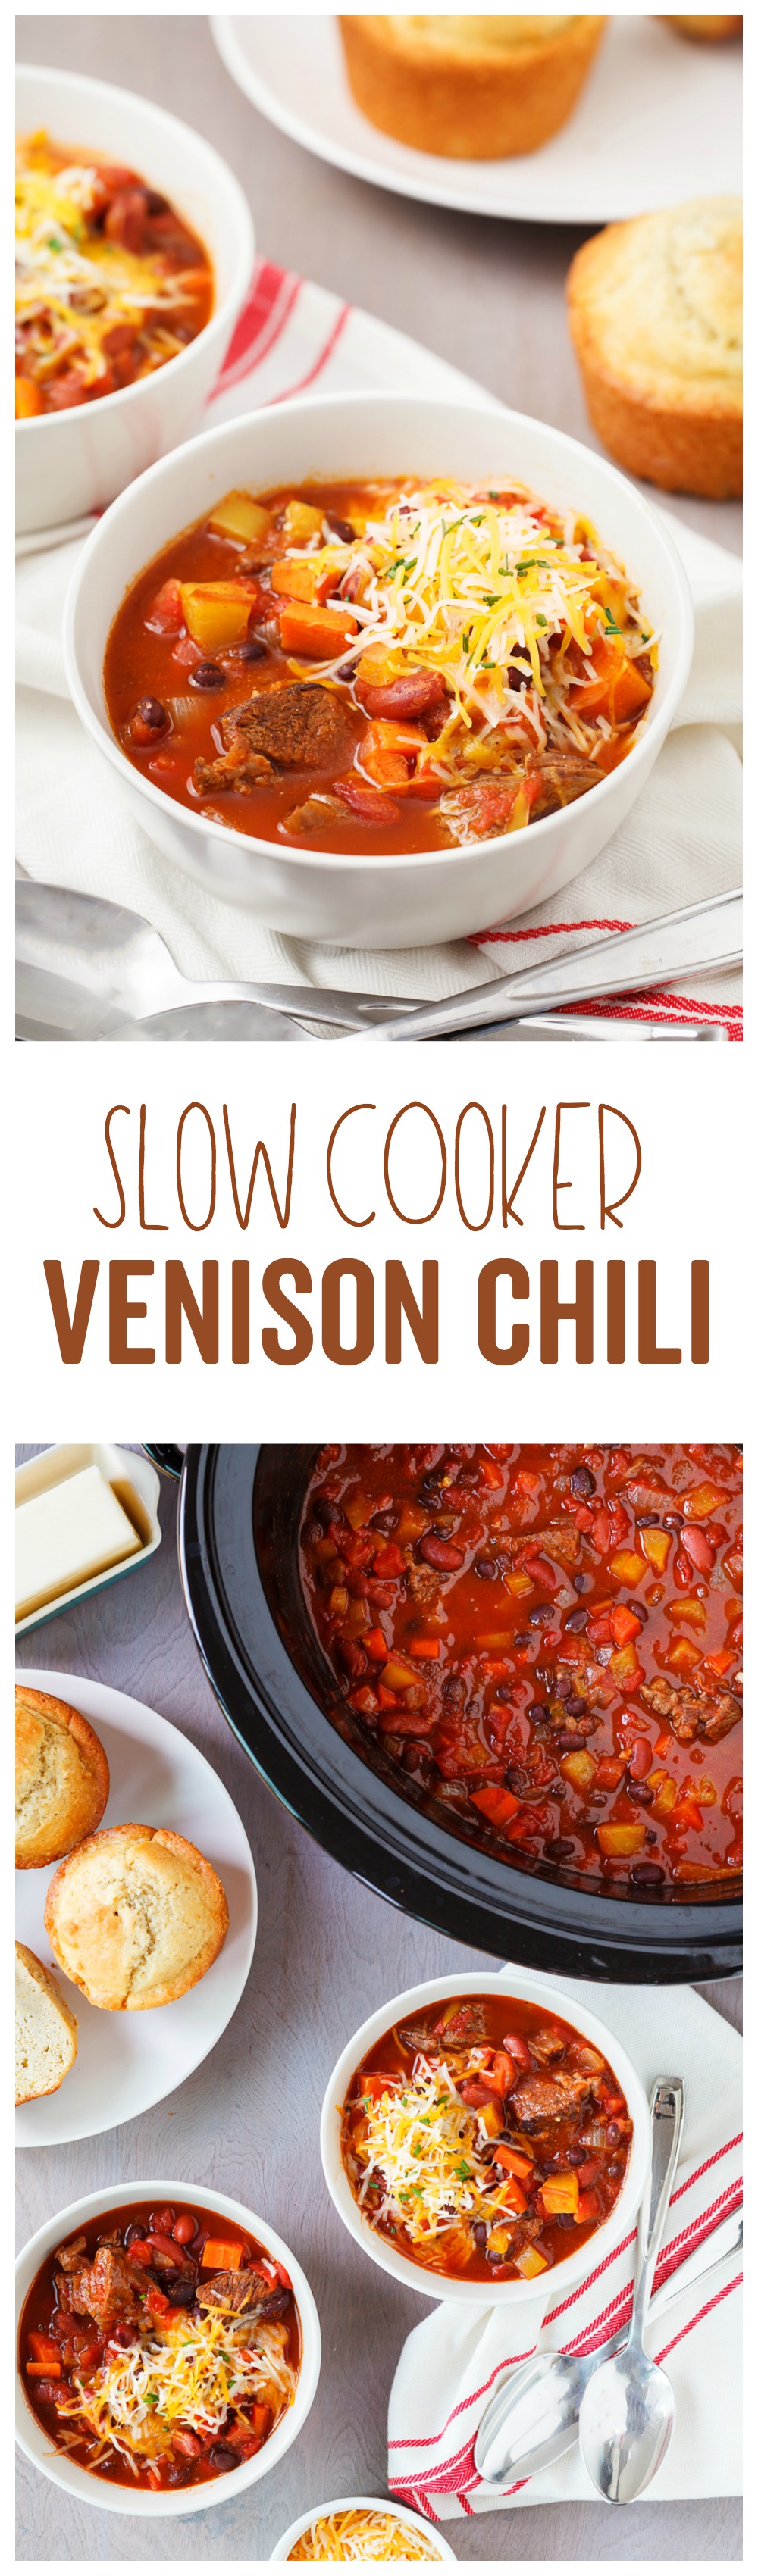 This Slow Cooker Venison Chili is the perfect weeknight meal. Pair this chili with a fresh garden salad and homemade bread for a hearty meal. 